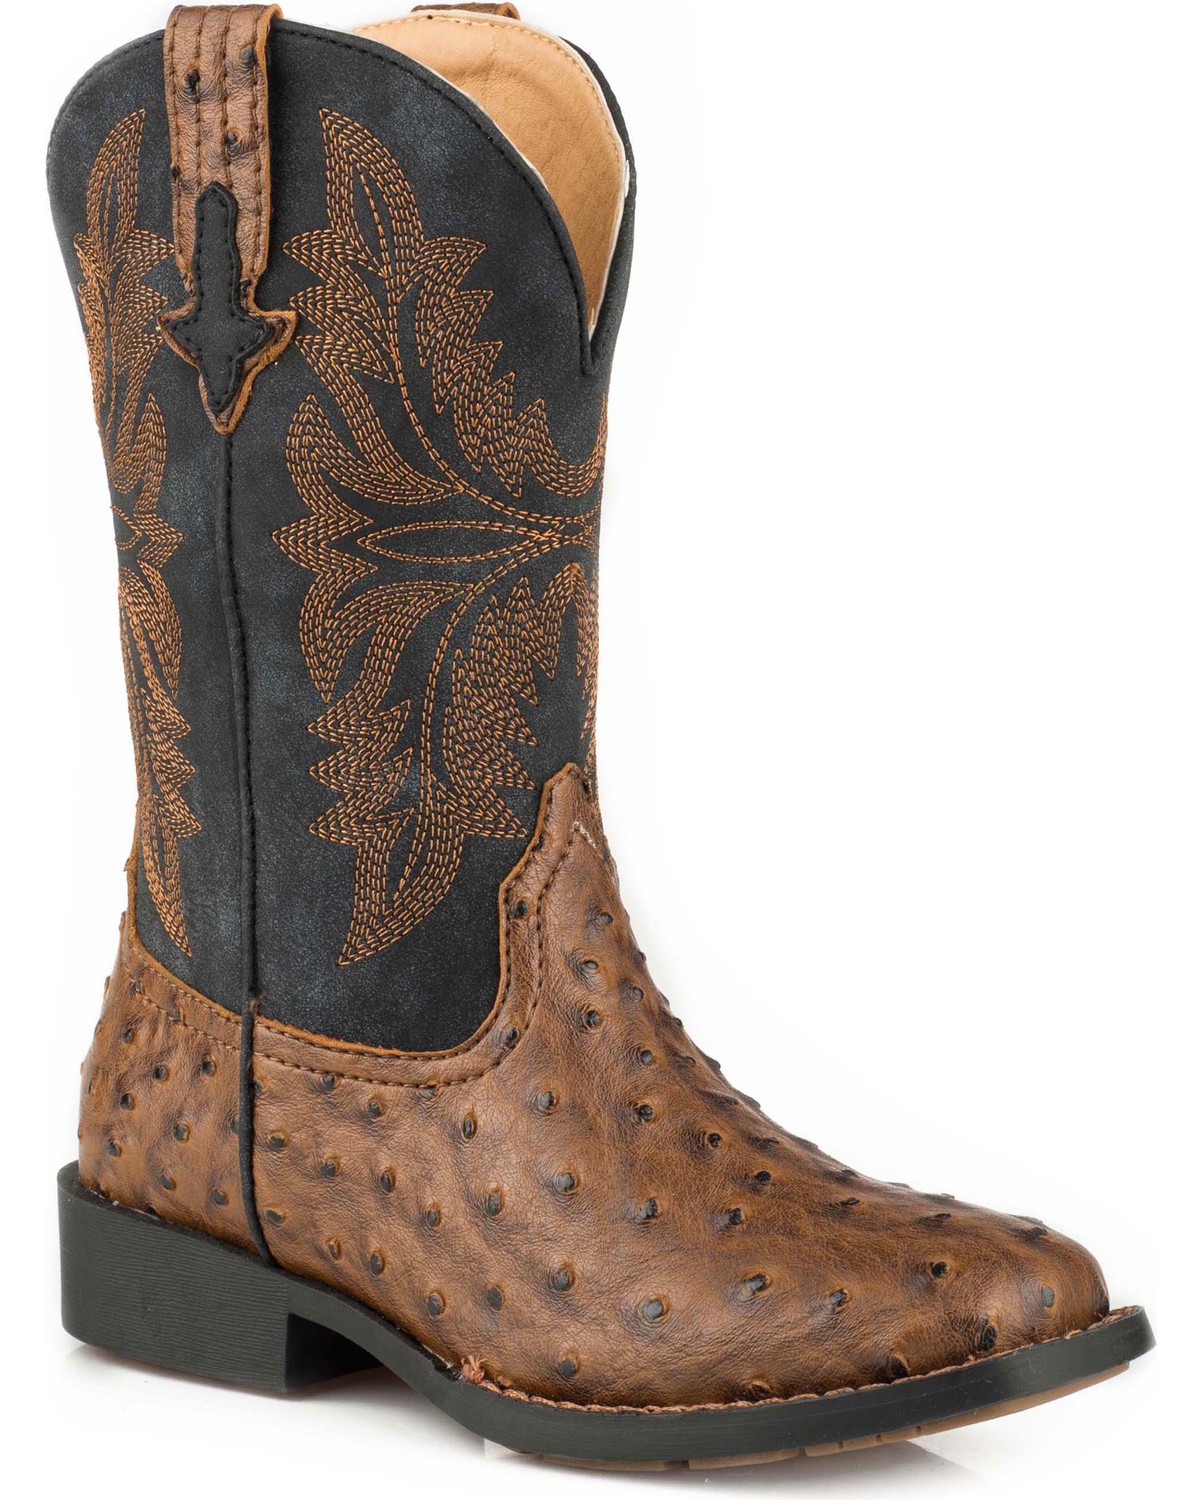 Roper Boys' Jed Faux Ostrich Western Boots - Square Toe